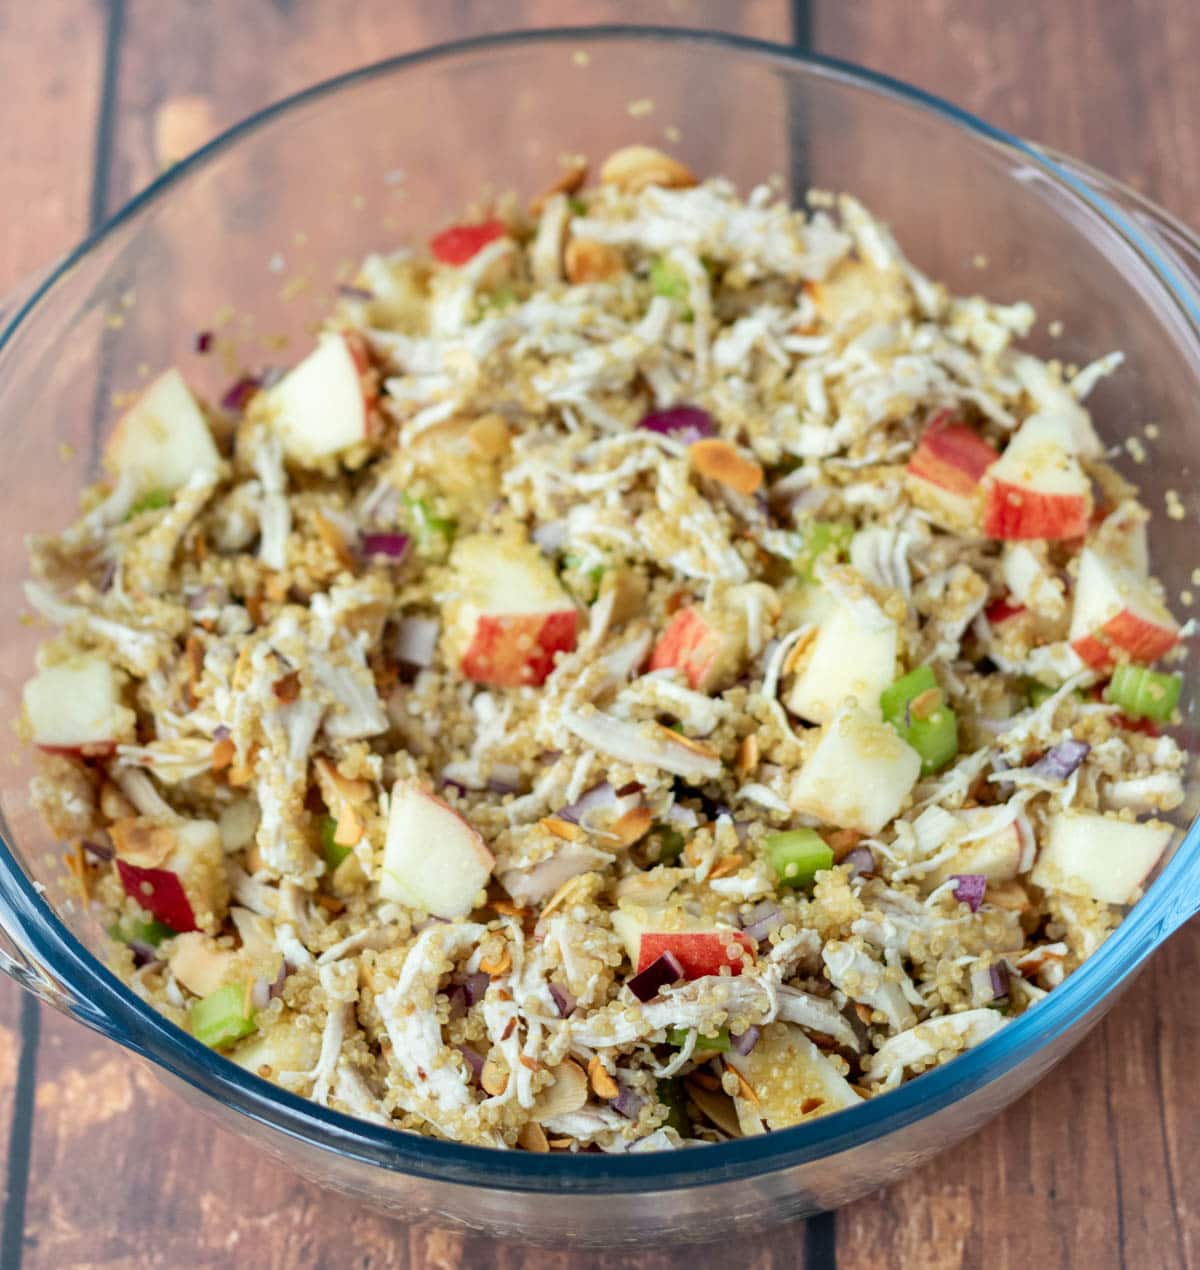 Quinoa, chicken, celery, onion, apples and almonds combined in a large glass bowl.